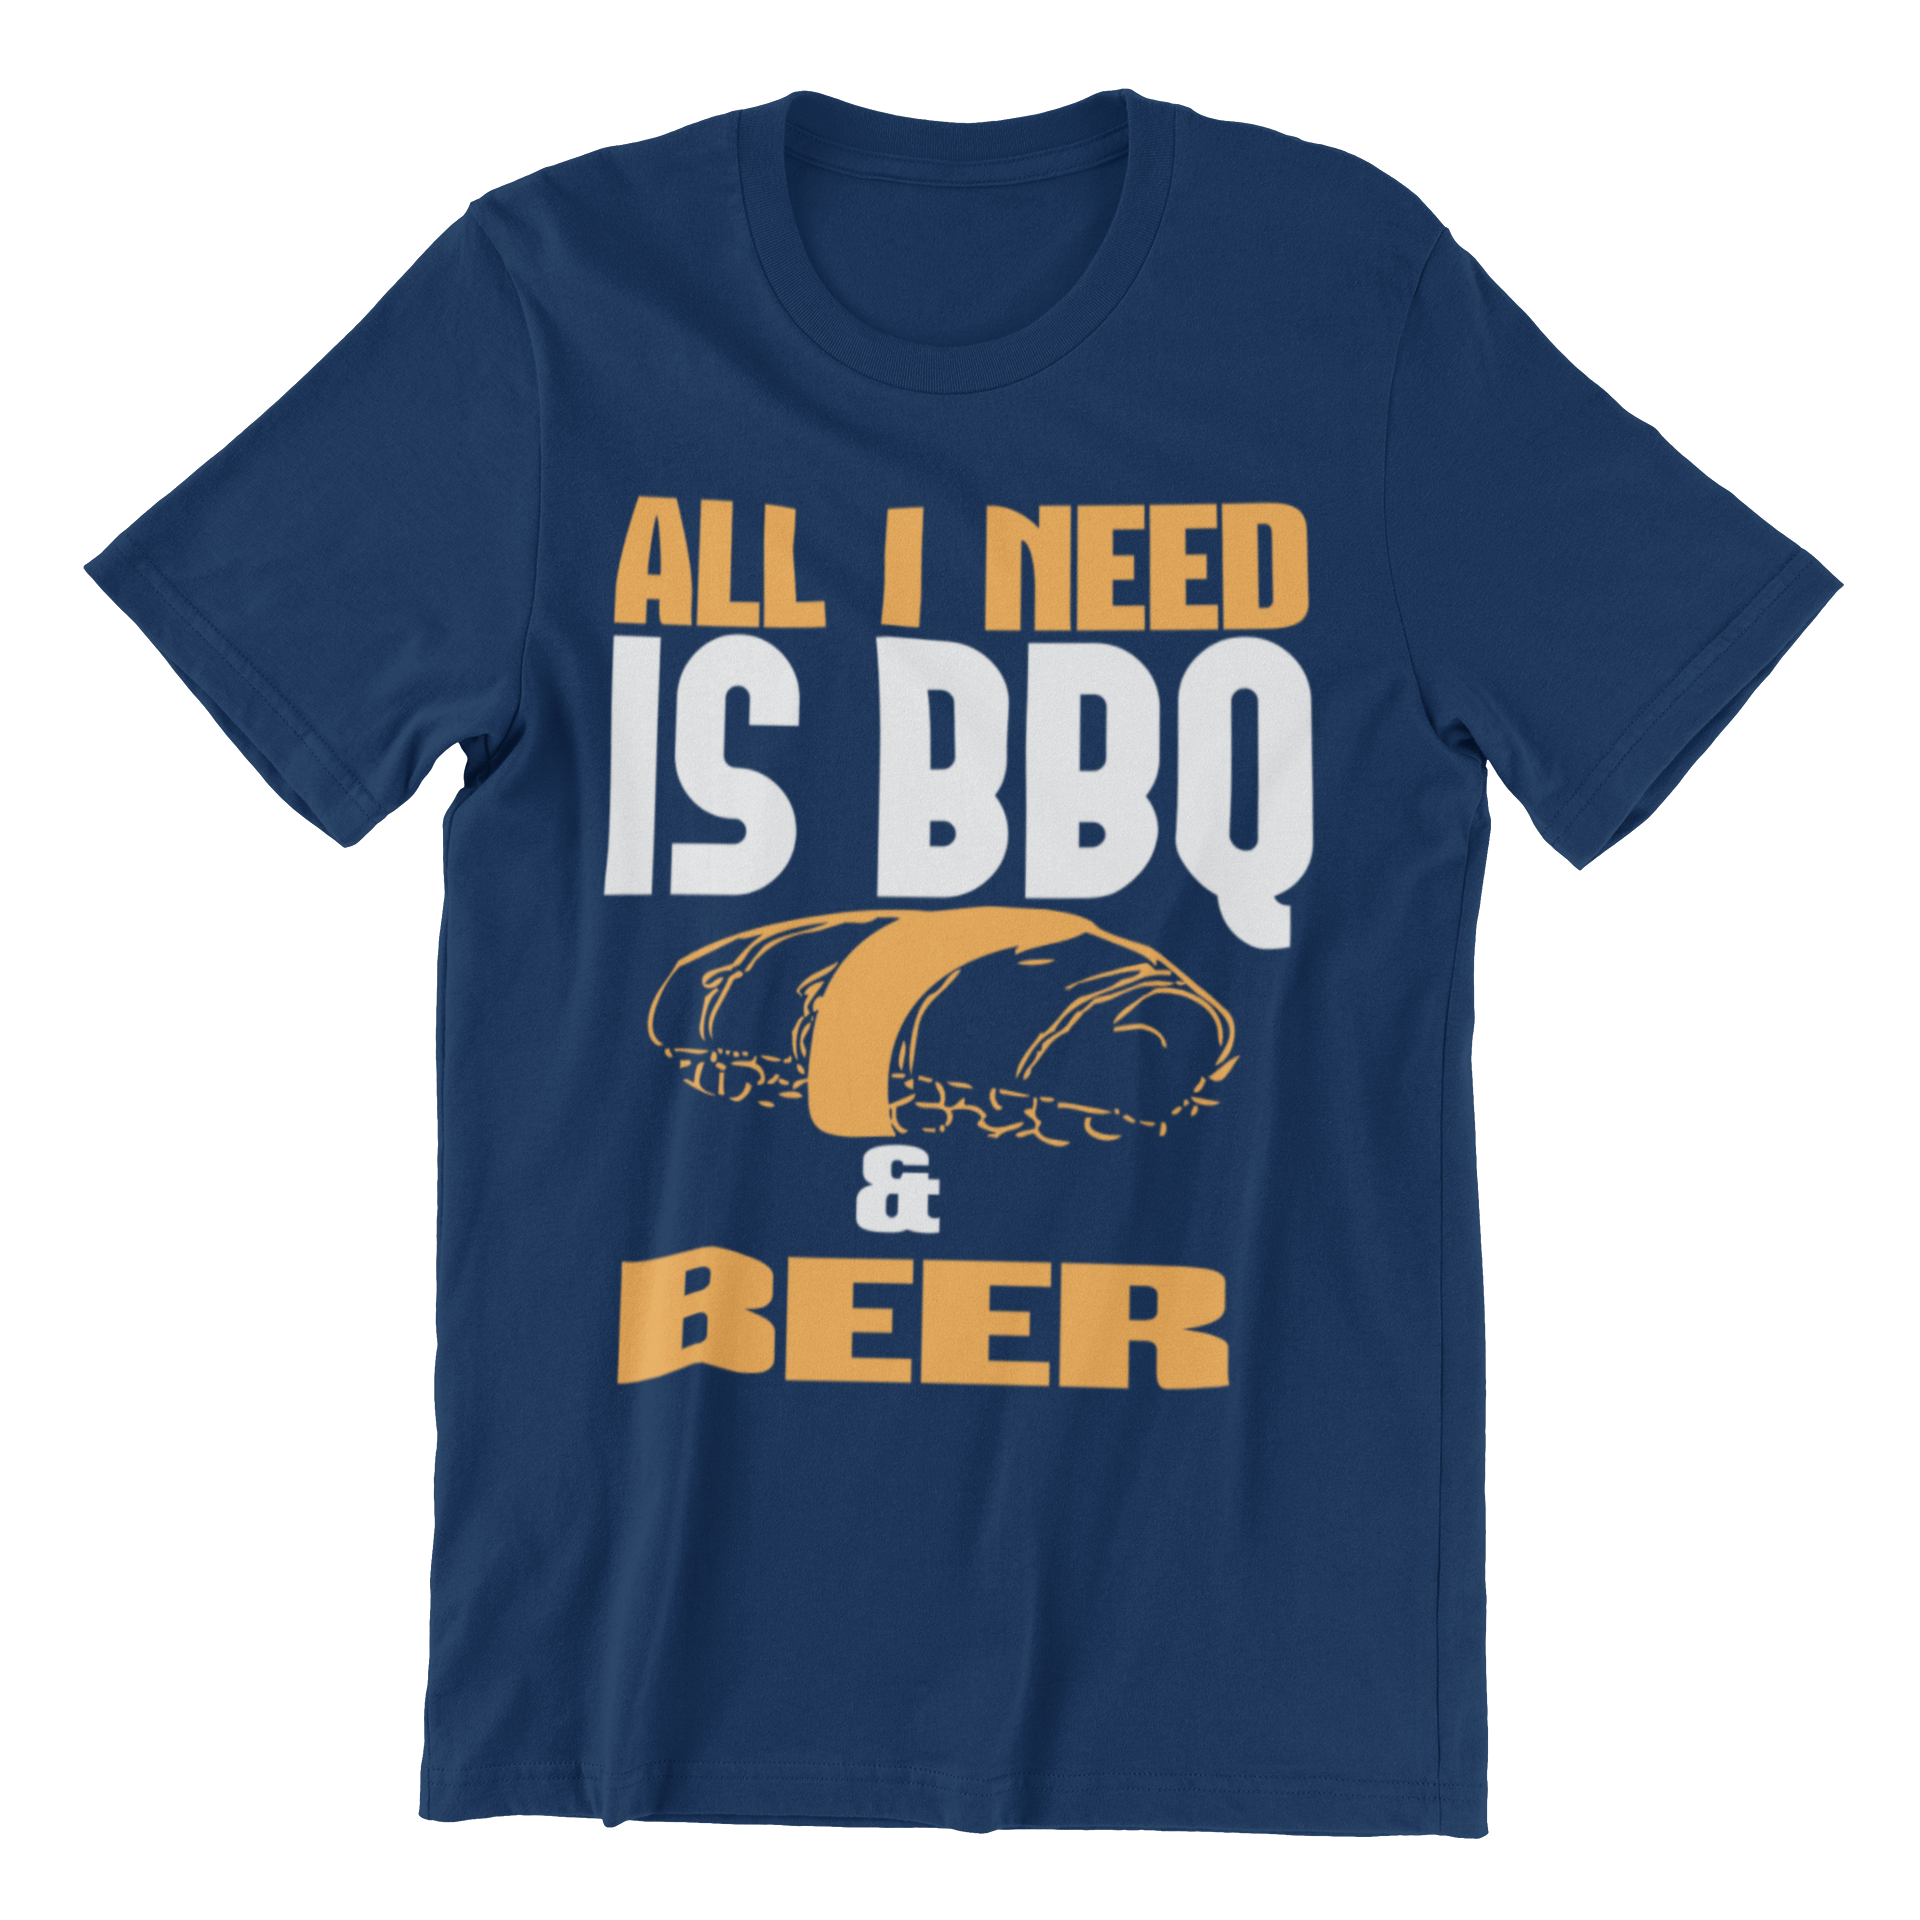 BBQ T Shirt Funny Tshirt for Men - All I need Is BBQ and Beer tshirt I Wantz It Large All I need is - Indigo 